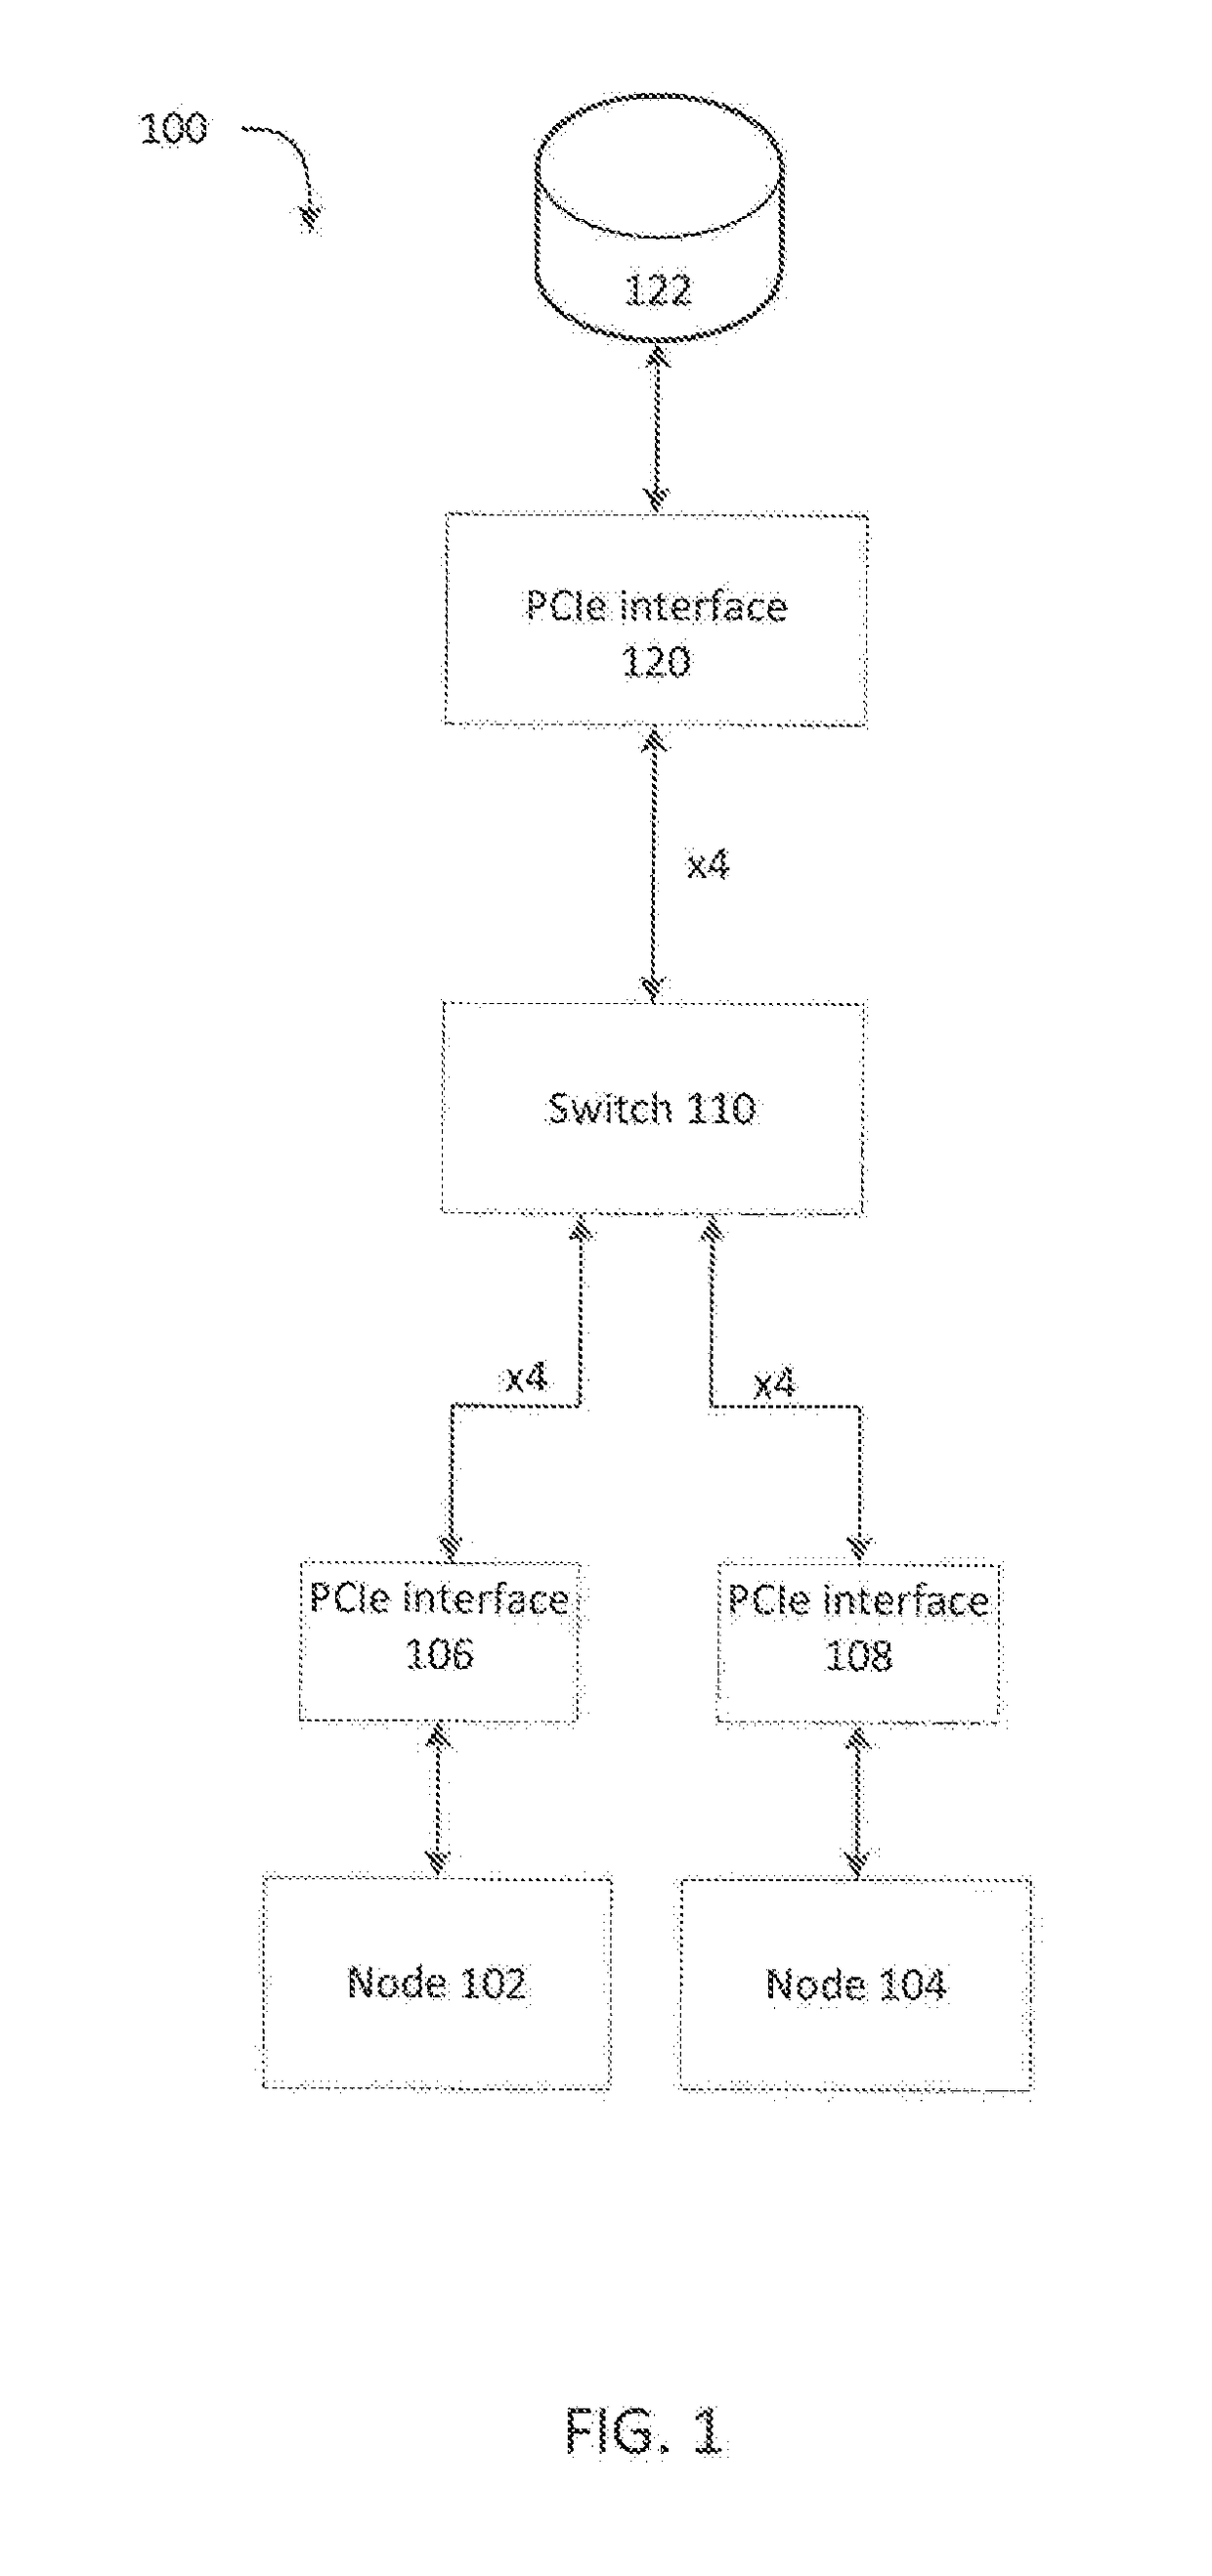 System for switching between a single node pcie mode and a multi-node pcie mode